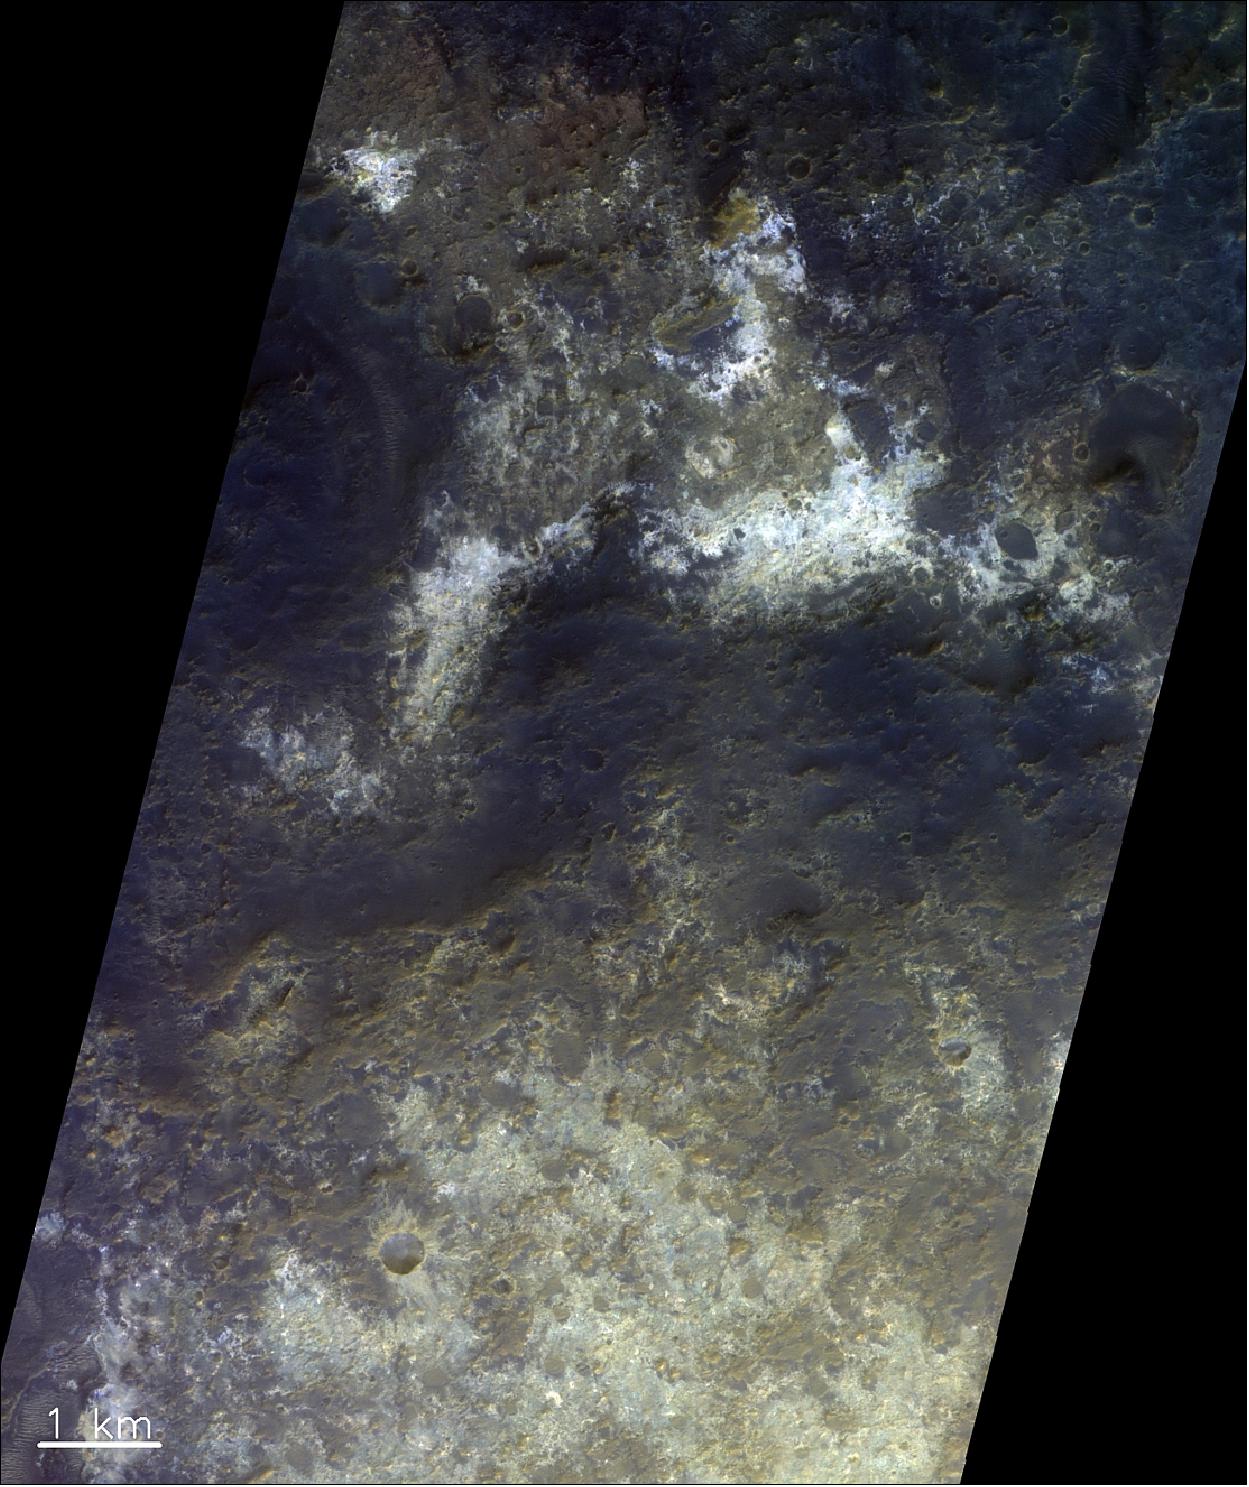 Figure 80: This colorful image of terrain south of the Mawrth Vallis outflow channel on Mars shows the diversity of mineralogical compositions found in this region. The image was taken by the CaSSIS instrument onboard the ESA-Roscosmos ExoMars TGO on 5 January 2019 and is shown as a color-composite that has been processed to better highlight the different compositions. The image is centered at 21.6°N/341.7°E. North is up (image credit: ESA/Roscosmos/CaSSIS, CC BY-SA 3.0 IGO)